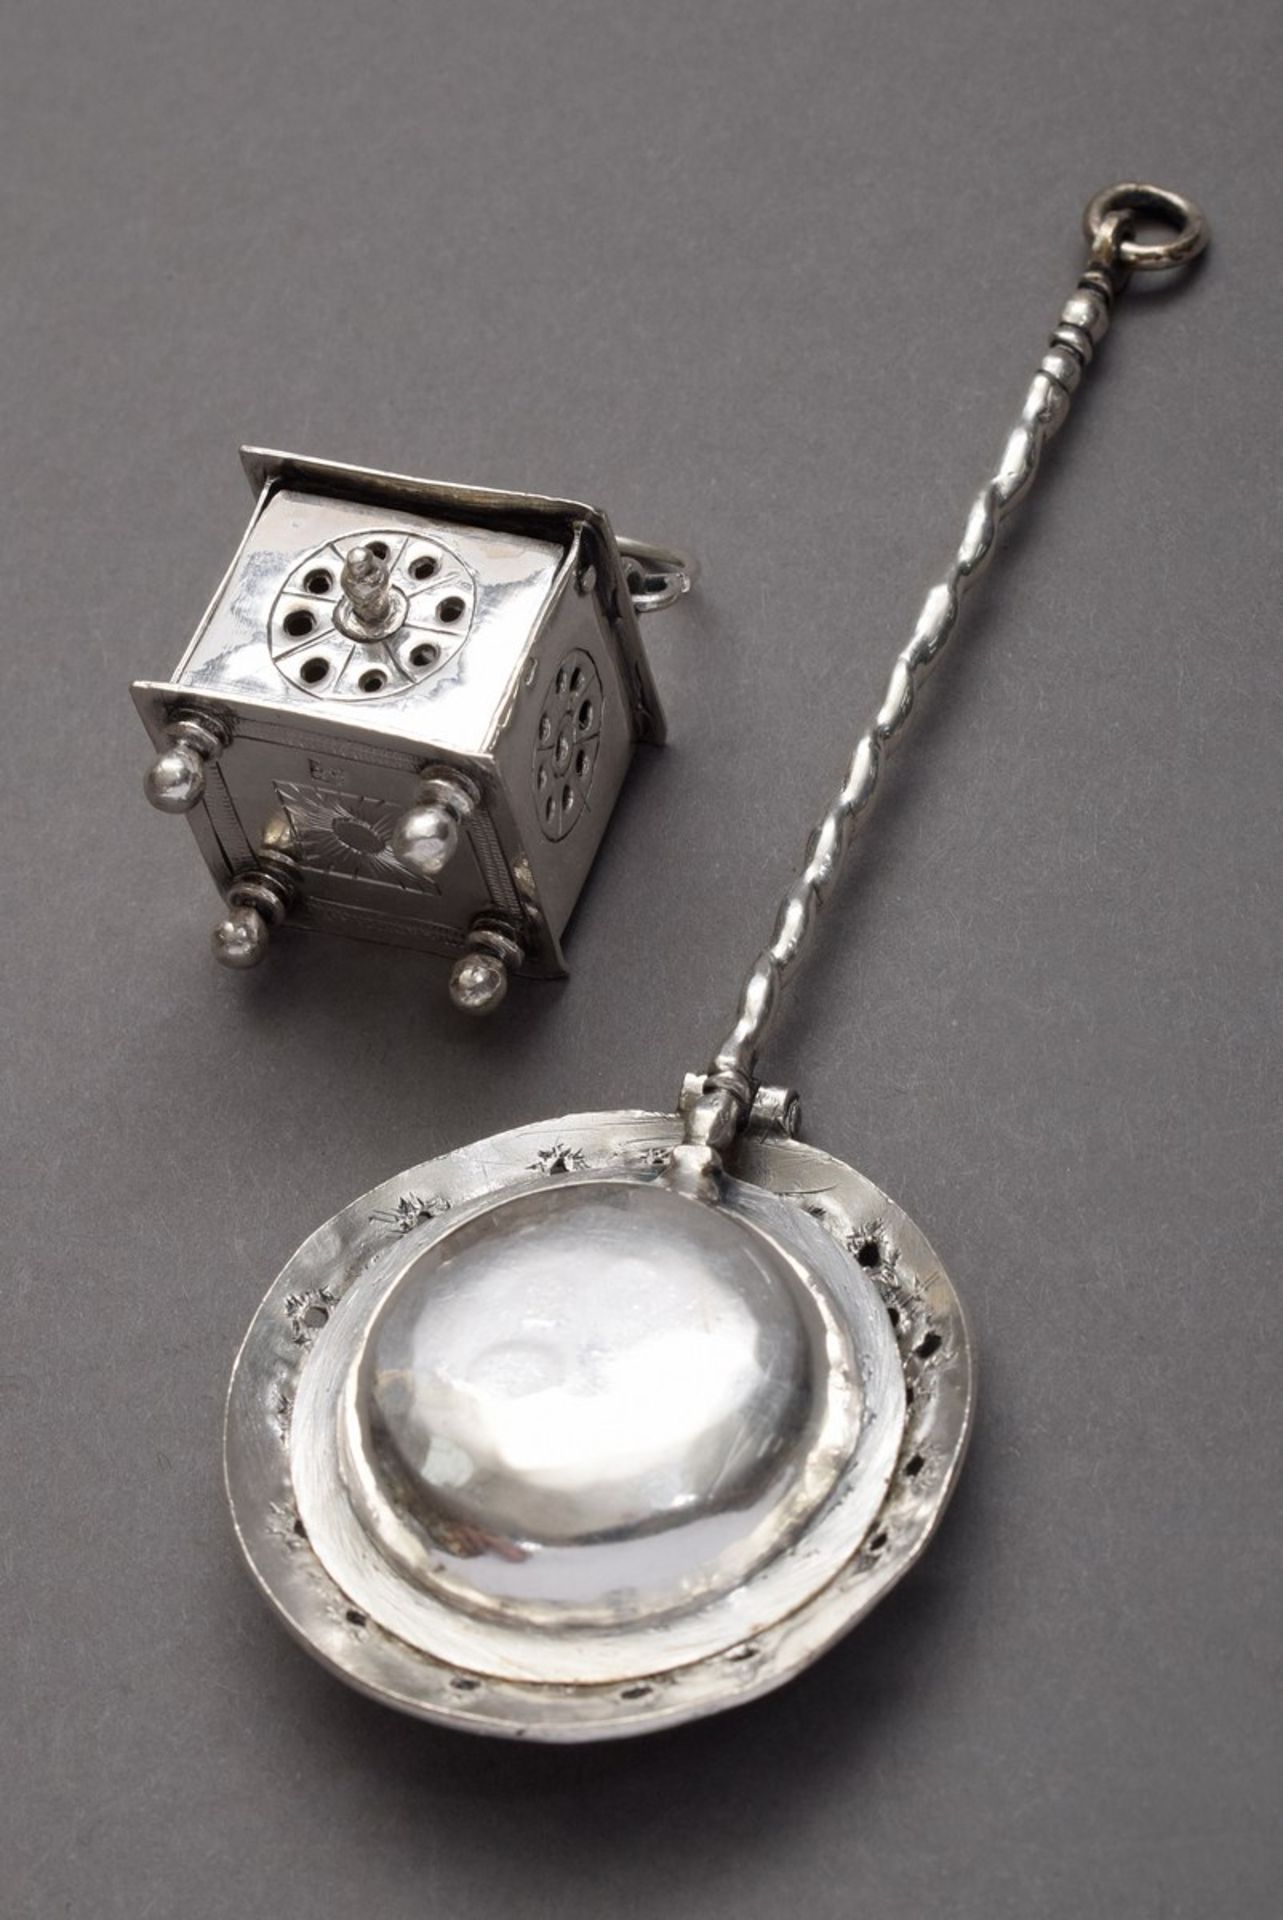 2 various Dutch miniatures, 18th century: bedpan, (l. 12,3cm) and foot warmer (2,5x2,5cm), silver,  - Image 2 of 4